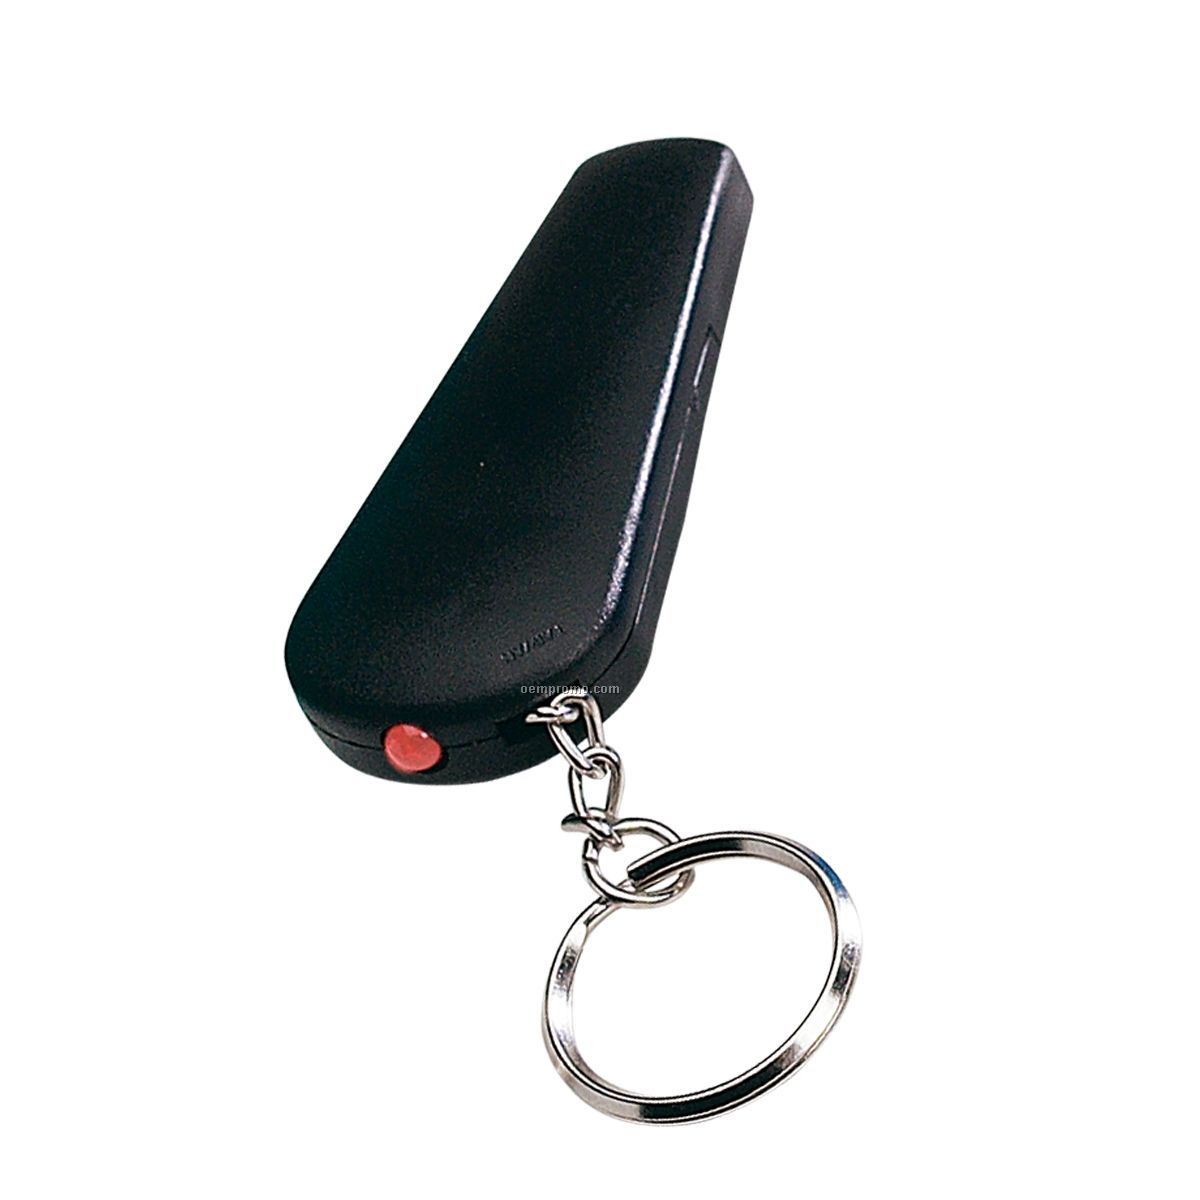 3-in-1 Black Light Up Whistle Keychain W/ Red LED